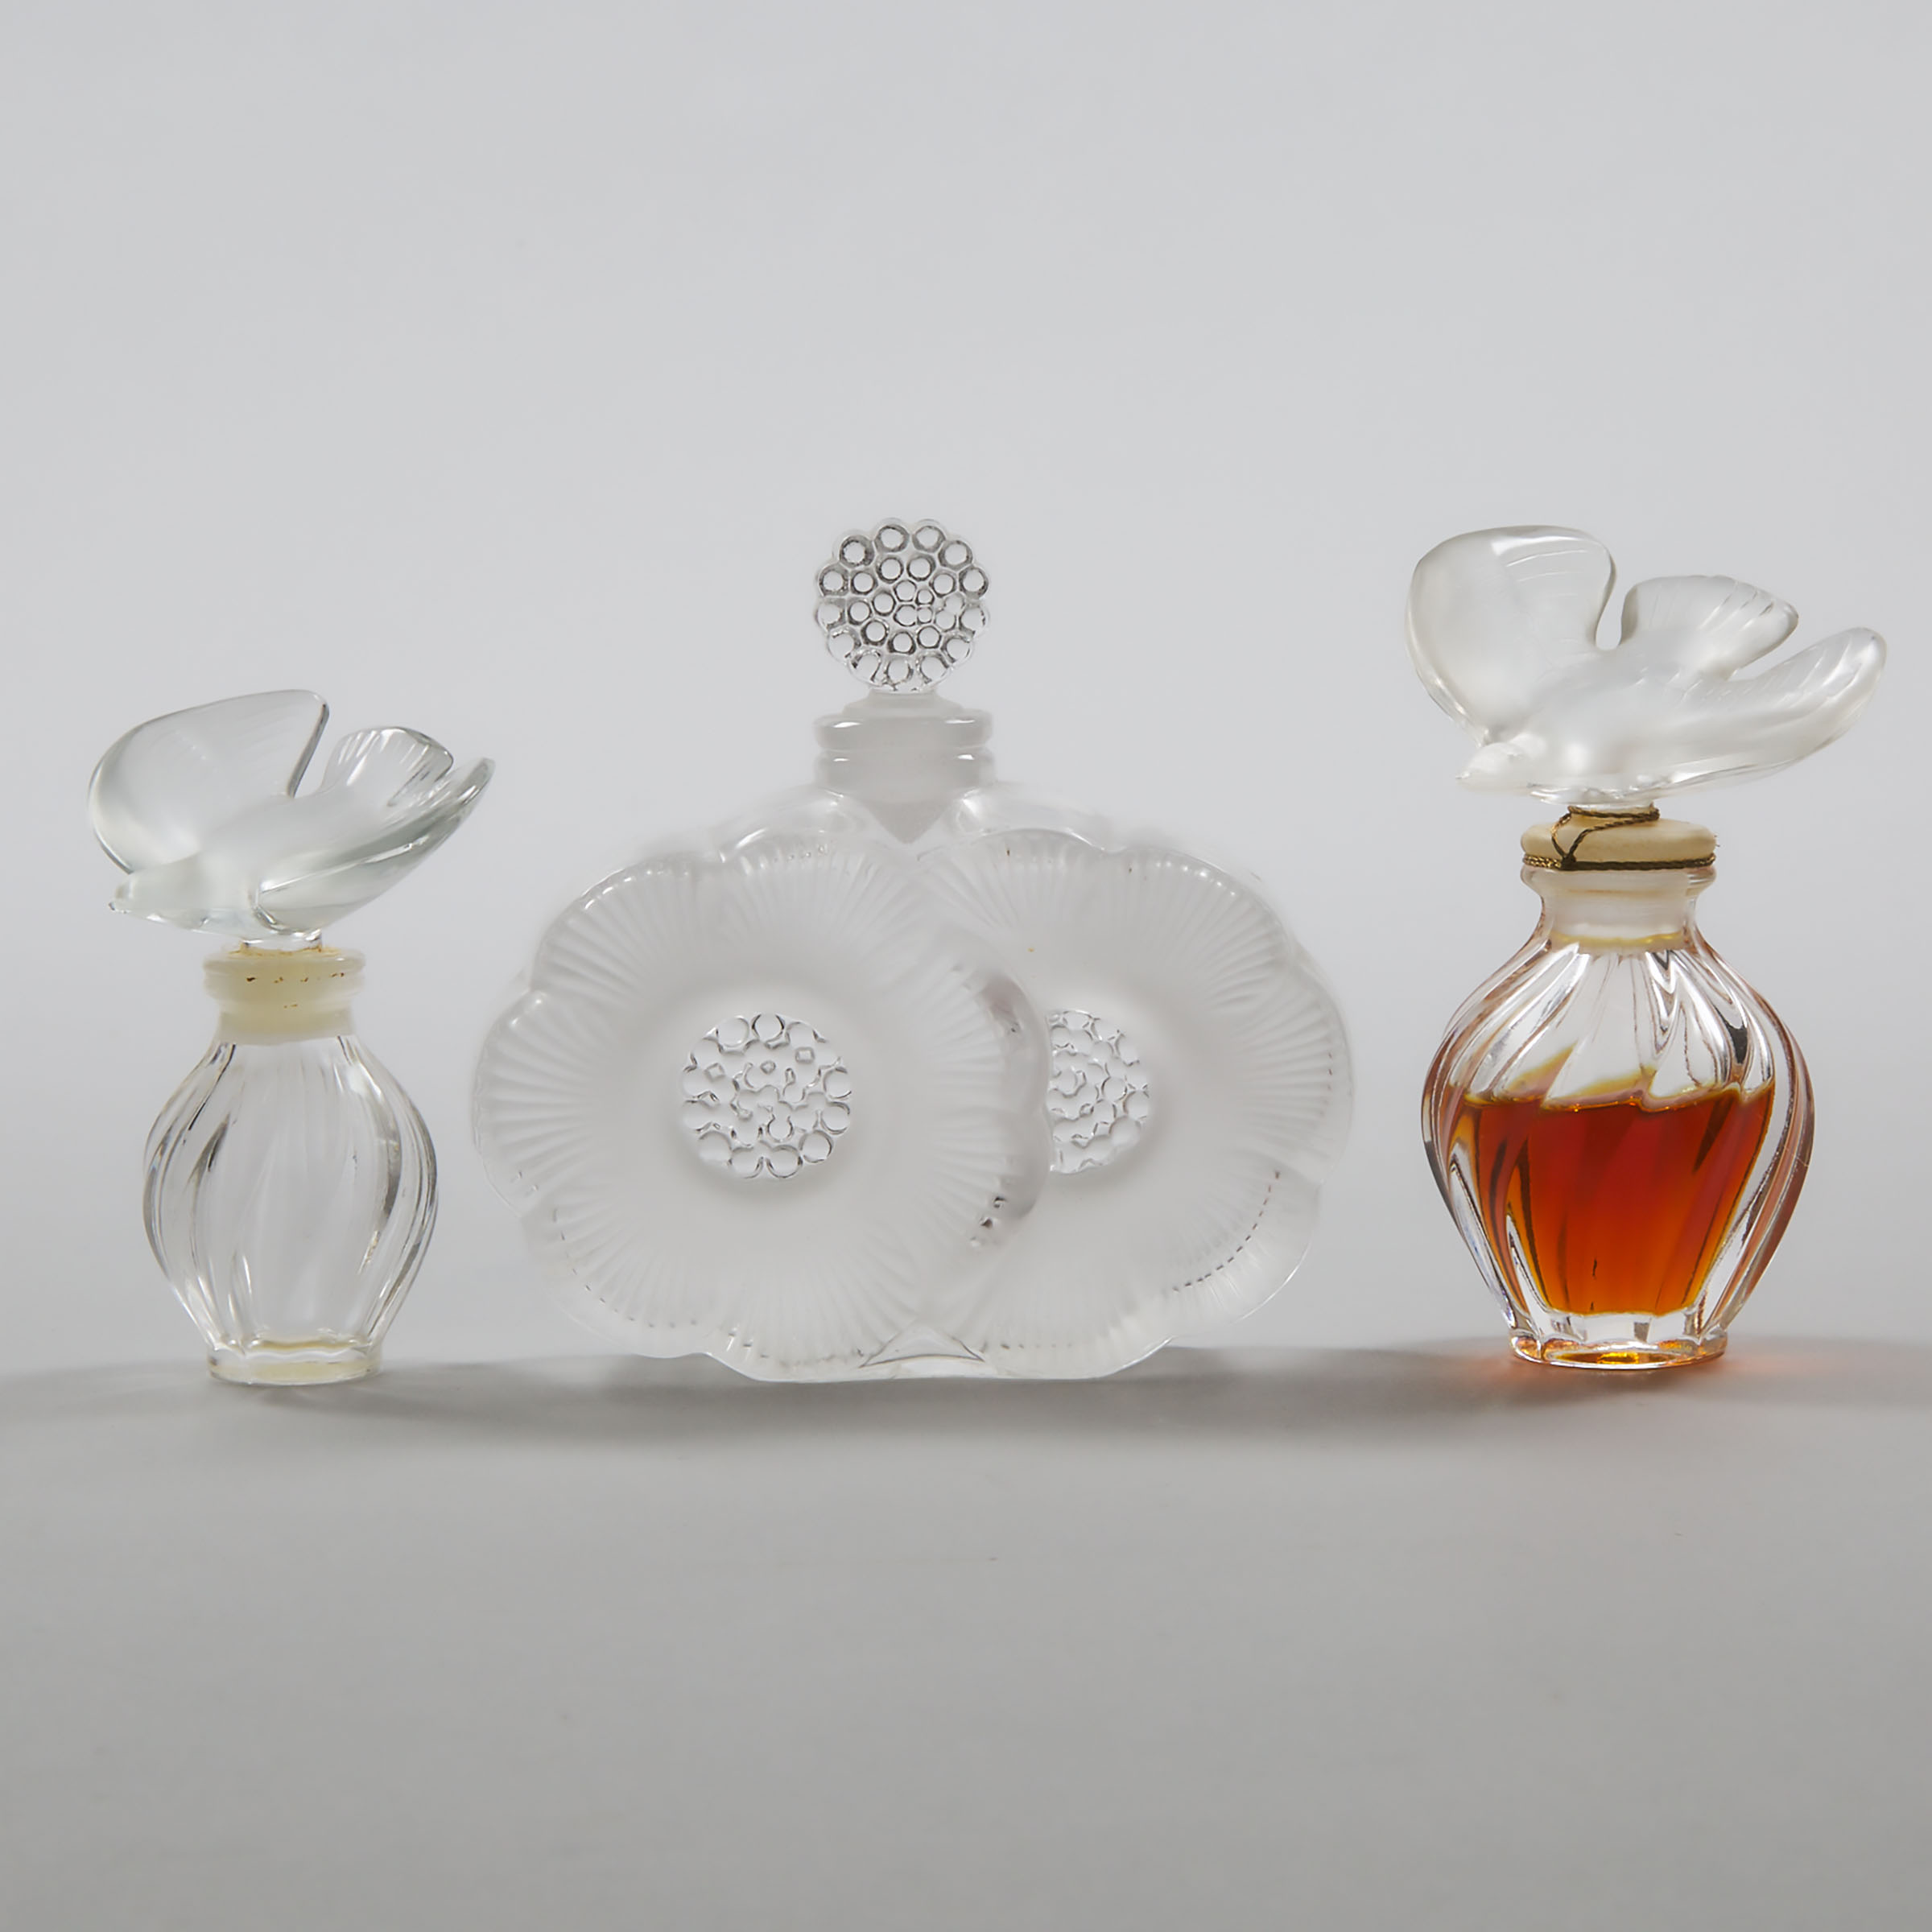 'Deux Fleurs', Lalique Moulded and Partly Frosted Glass Perfume Bottle and Two Others, 20th century